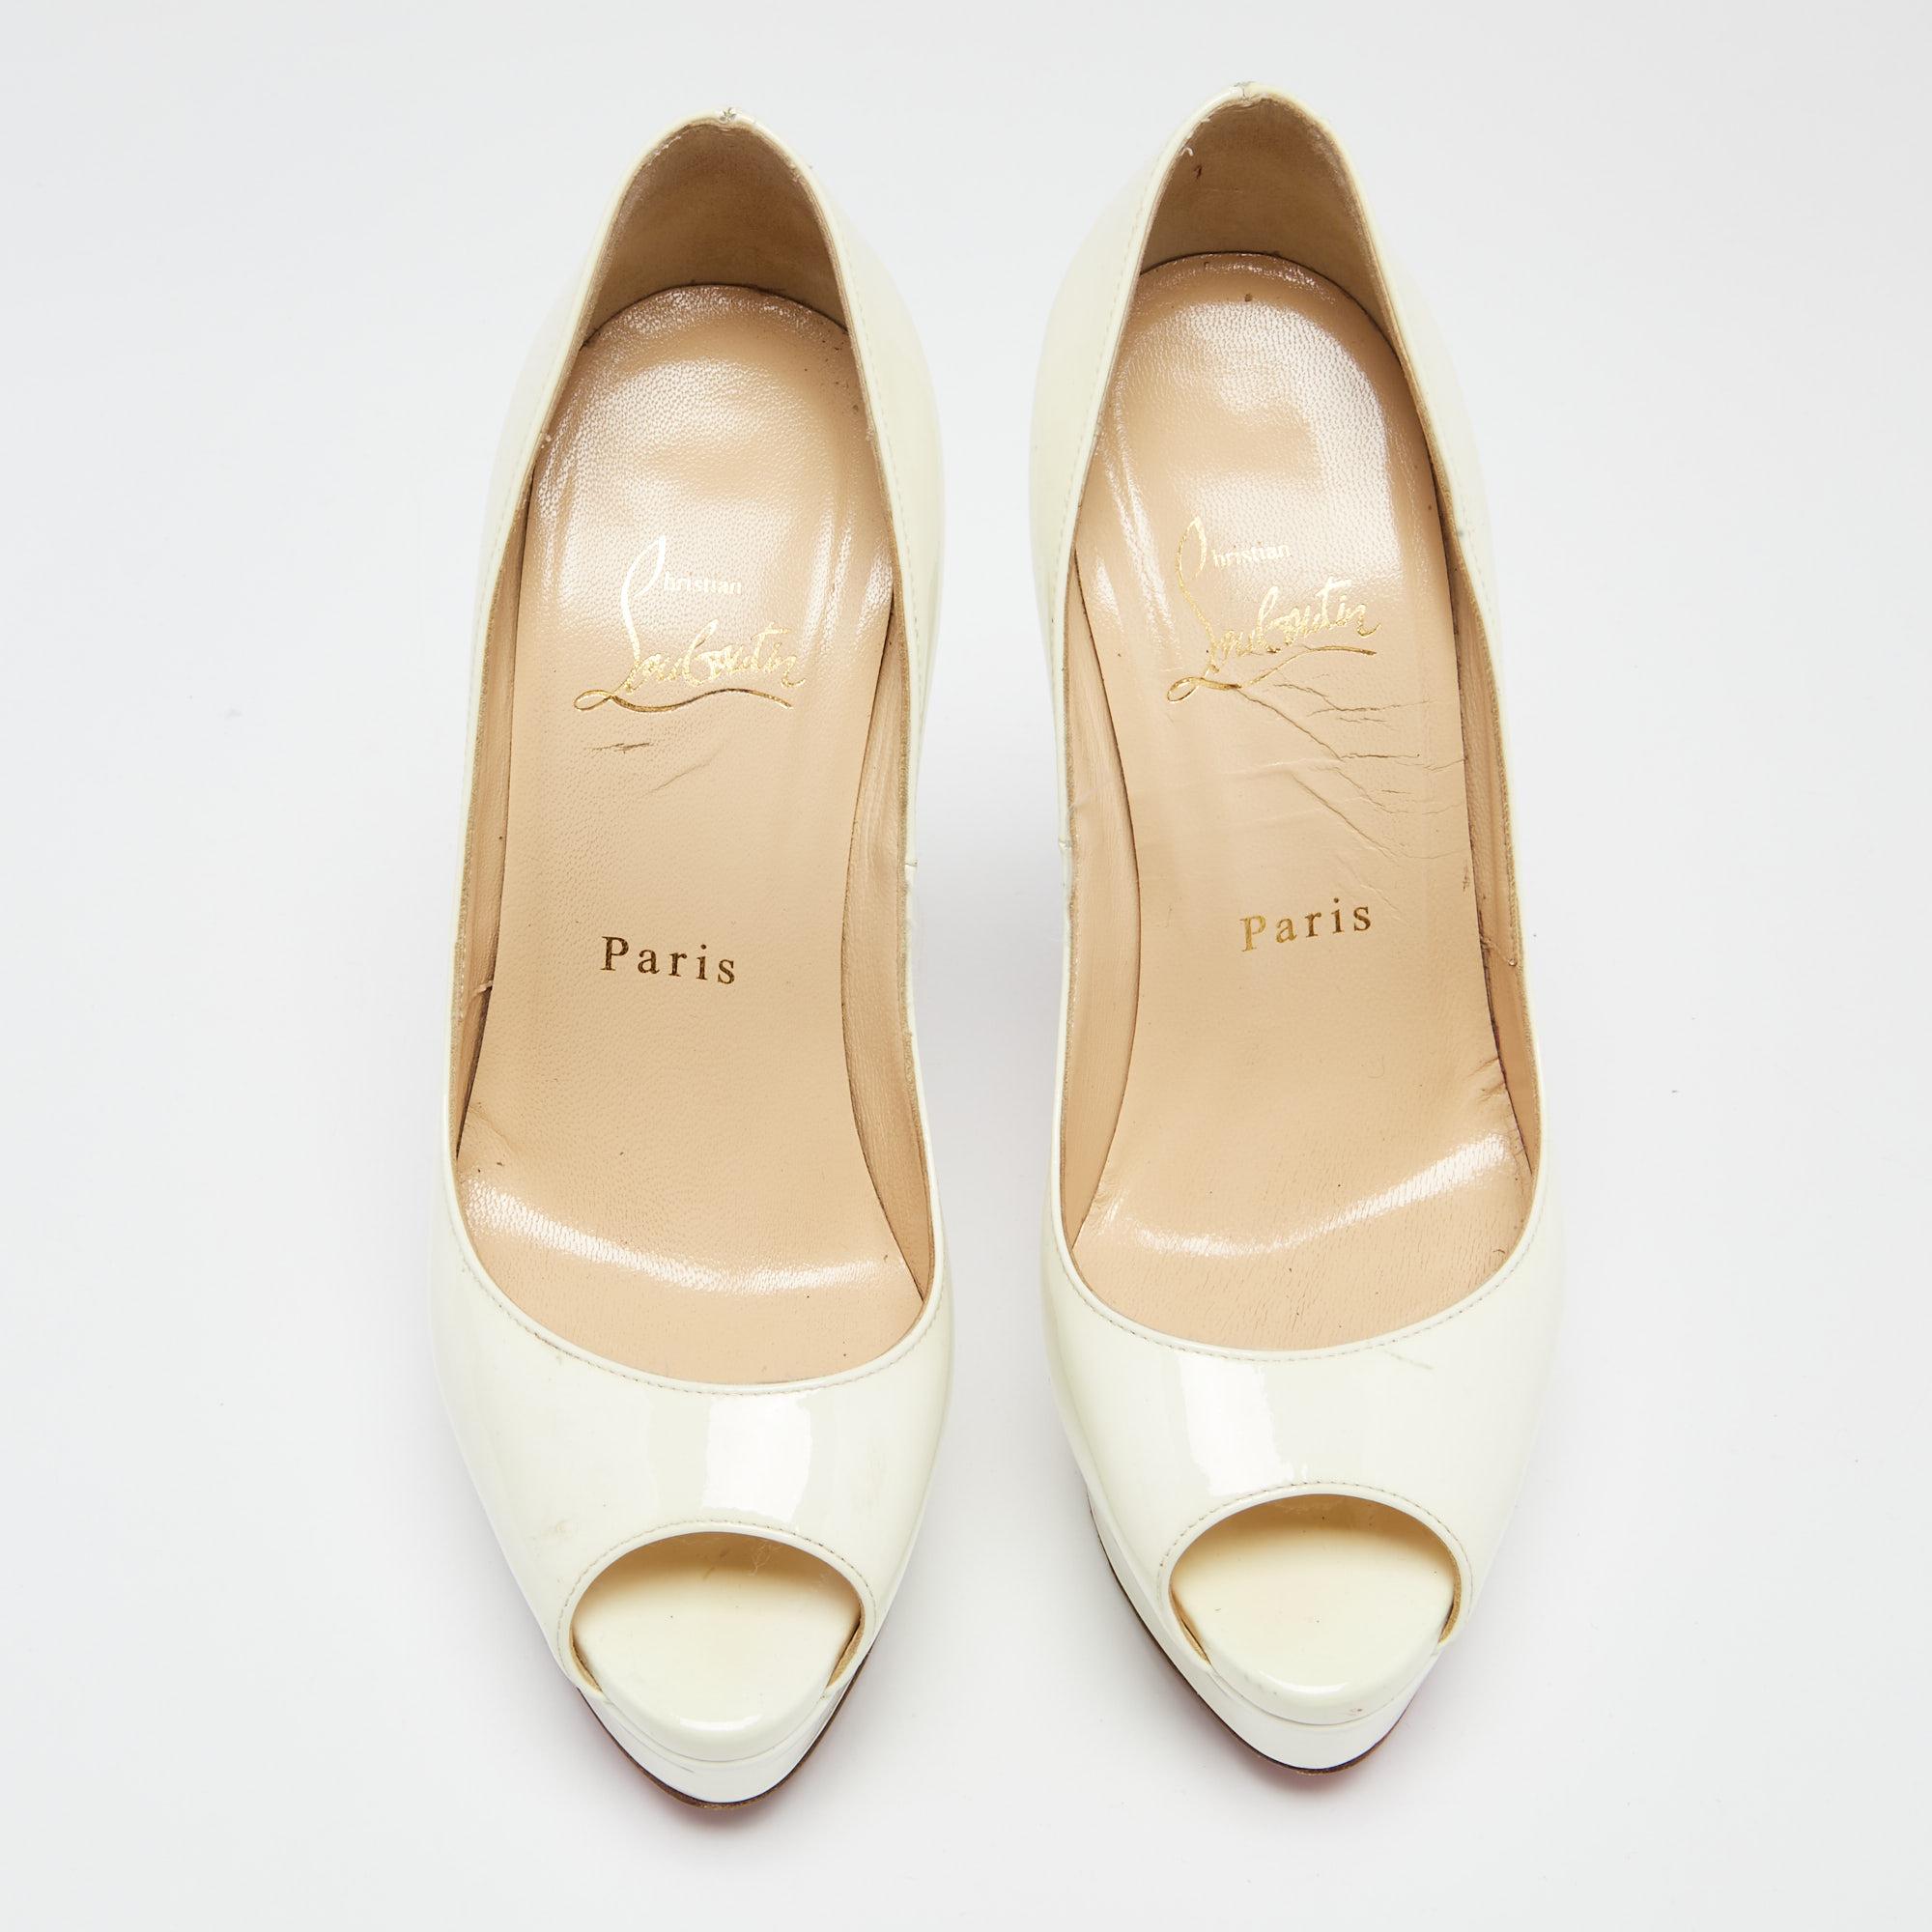 Stand out from the crowd with this gorgeous pair of Christian Louboutin pumps that exude high fashion with class. Crafted from patent leather, this is a creation from their Lady Peep collection. It features a classic white shade with peep toes and a